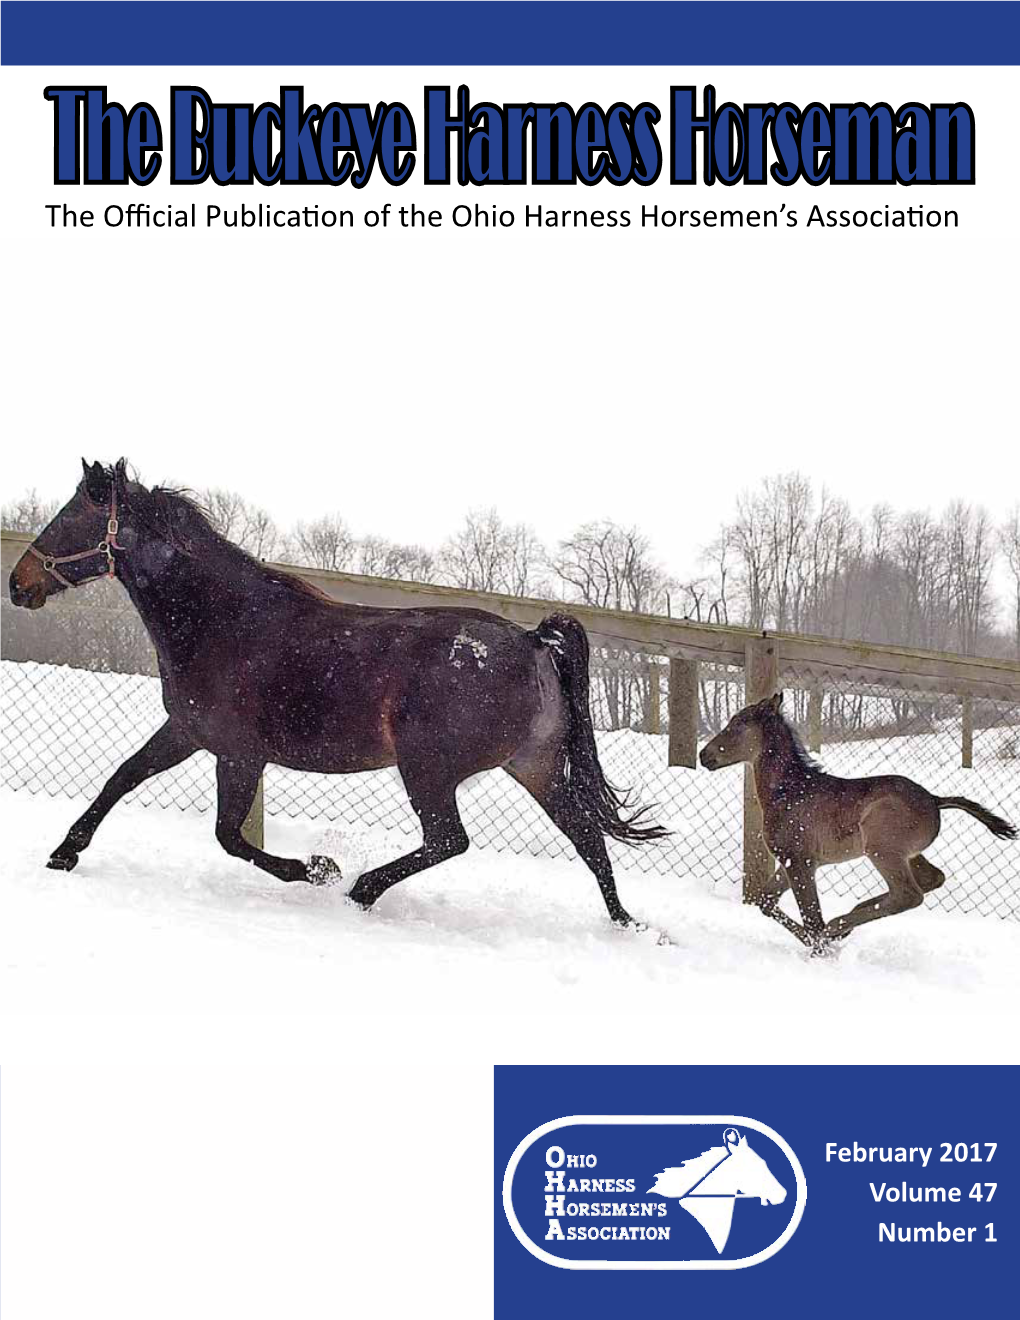 The Official Publication of the Ohio Harness Horsemen's Association